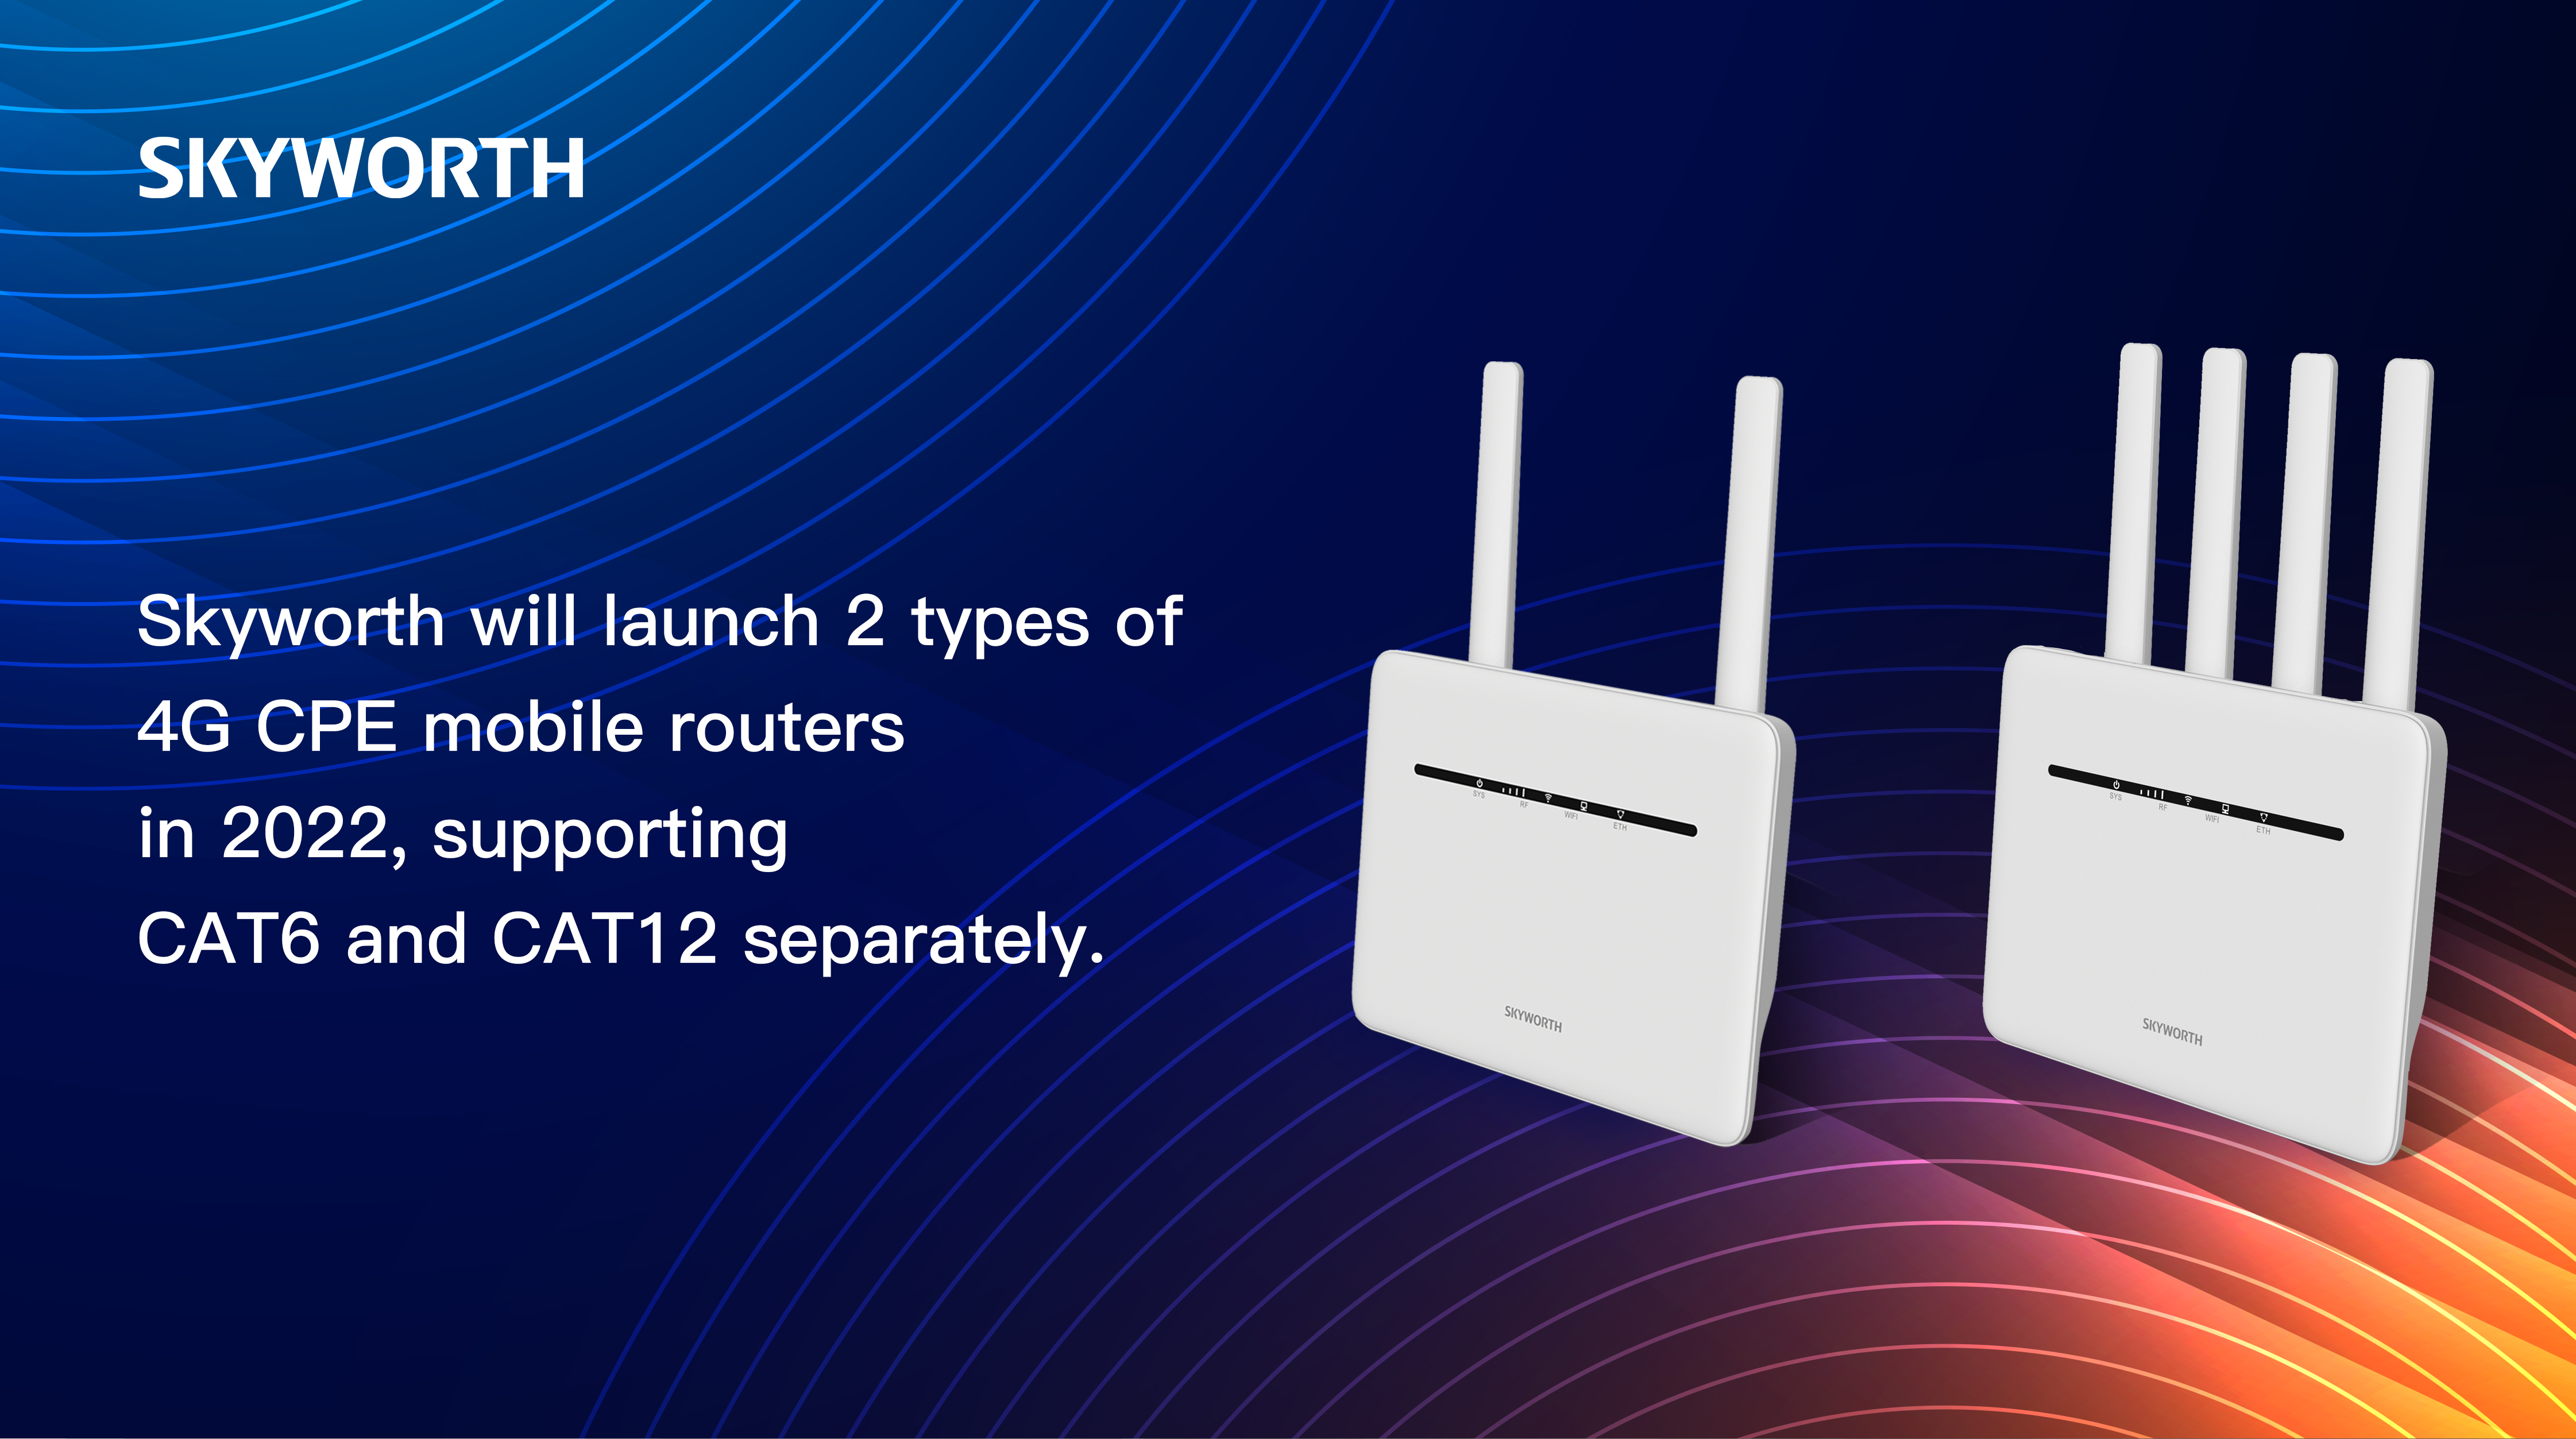 Skyworth will soon launch its first LTE Home Gateway with AC1200 Wi-Fi Router